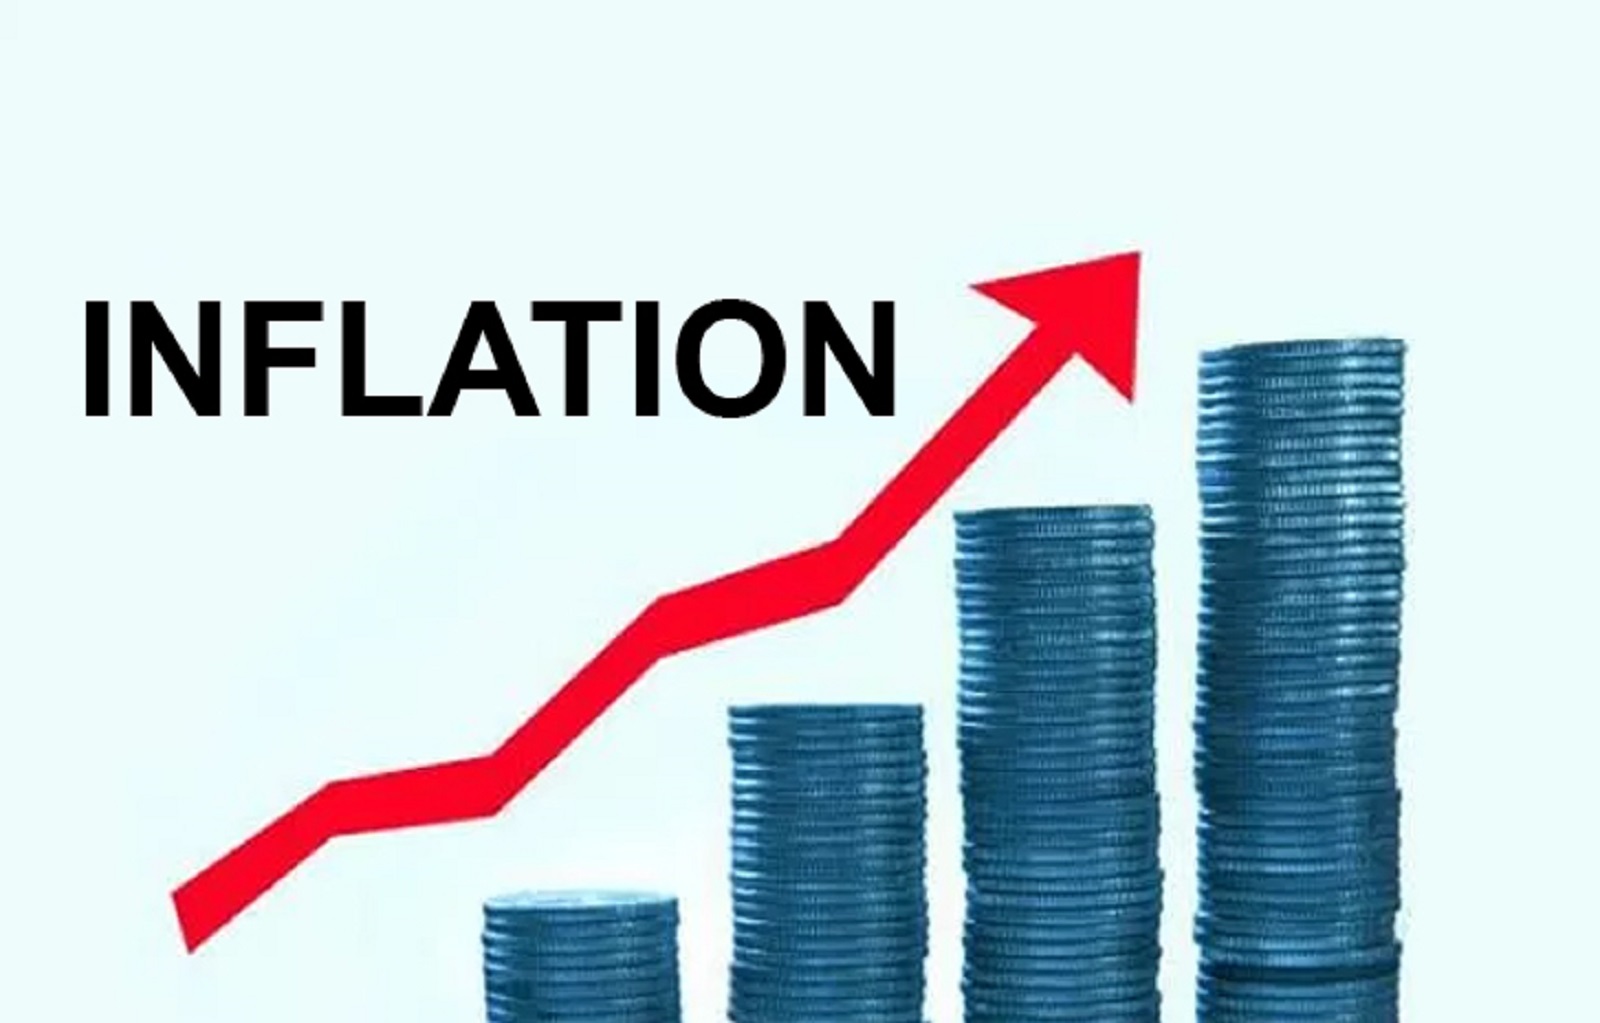 Concerns Mount as Nigeria's inflation surges to 17-year high in August